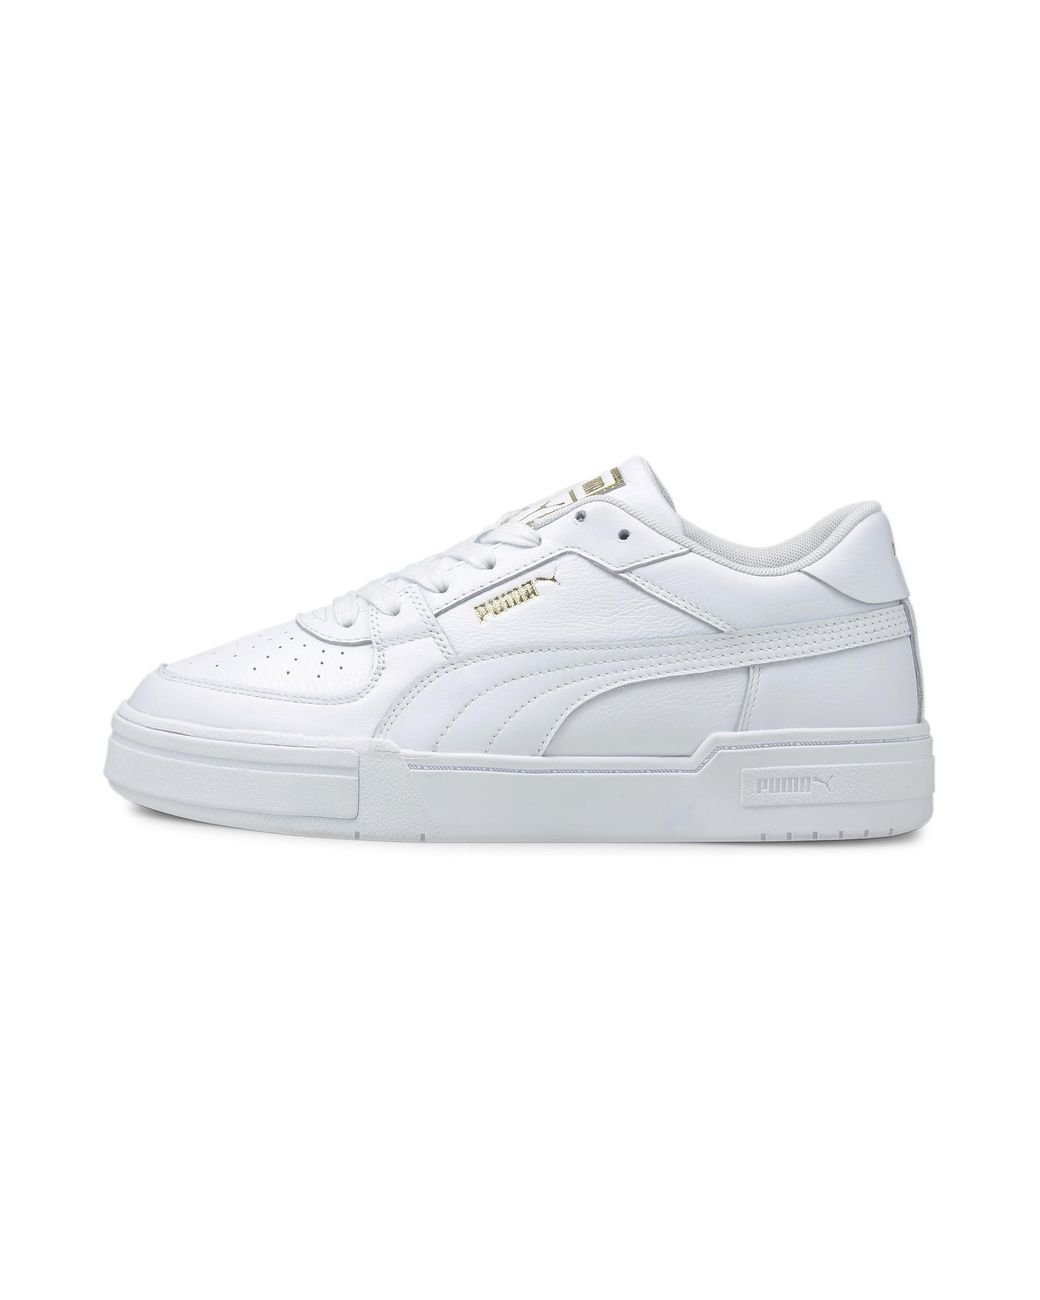 PUMA Leather Ca Pro Classic Sneakers in White for Men | Lyst